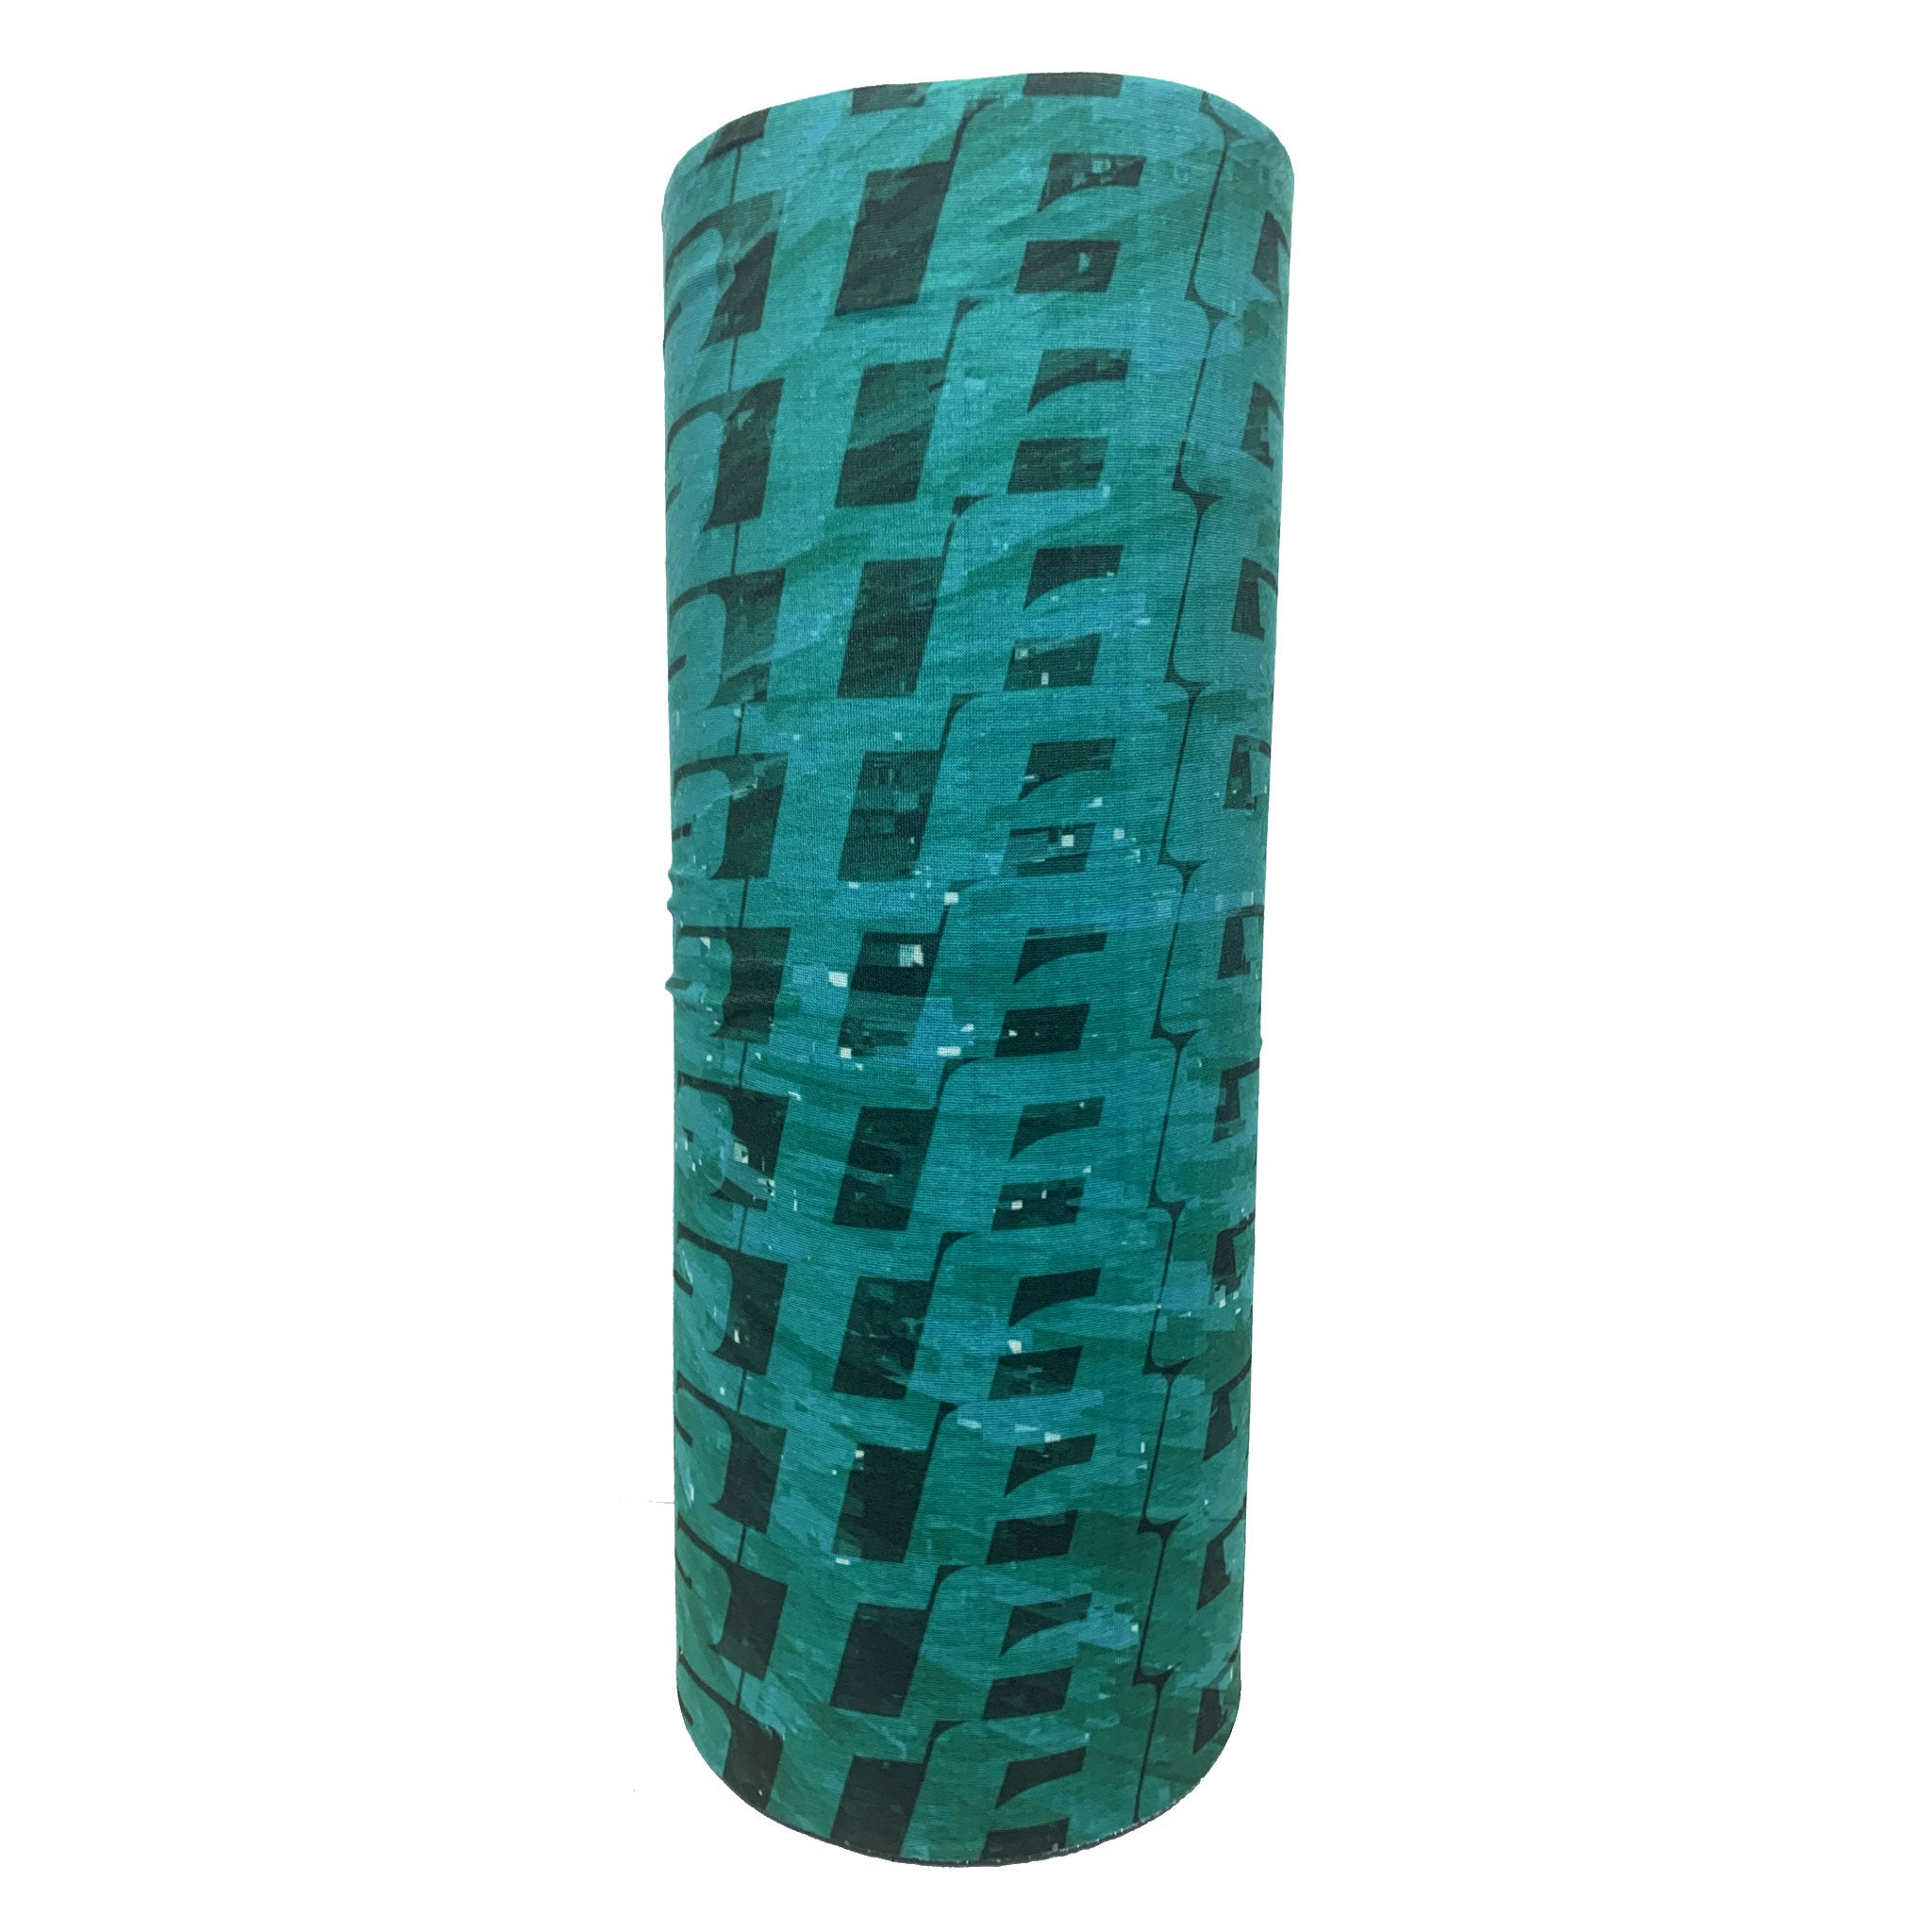 STAGE Face Tube - Green Matrix - Adult